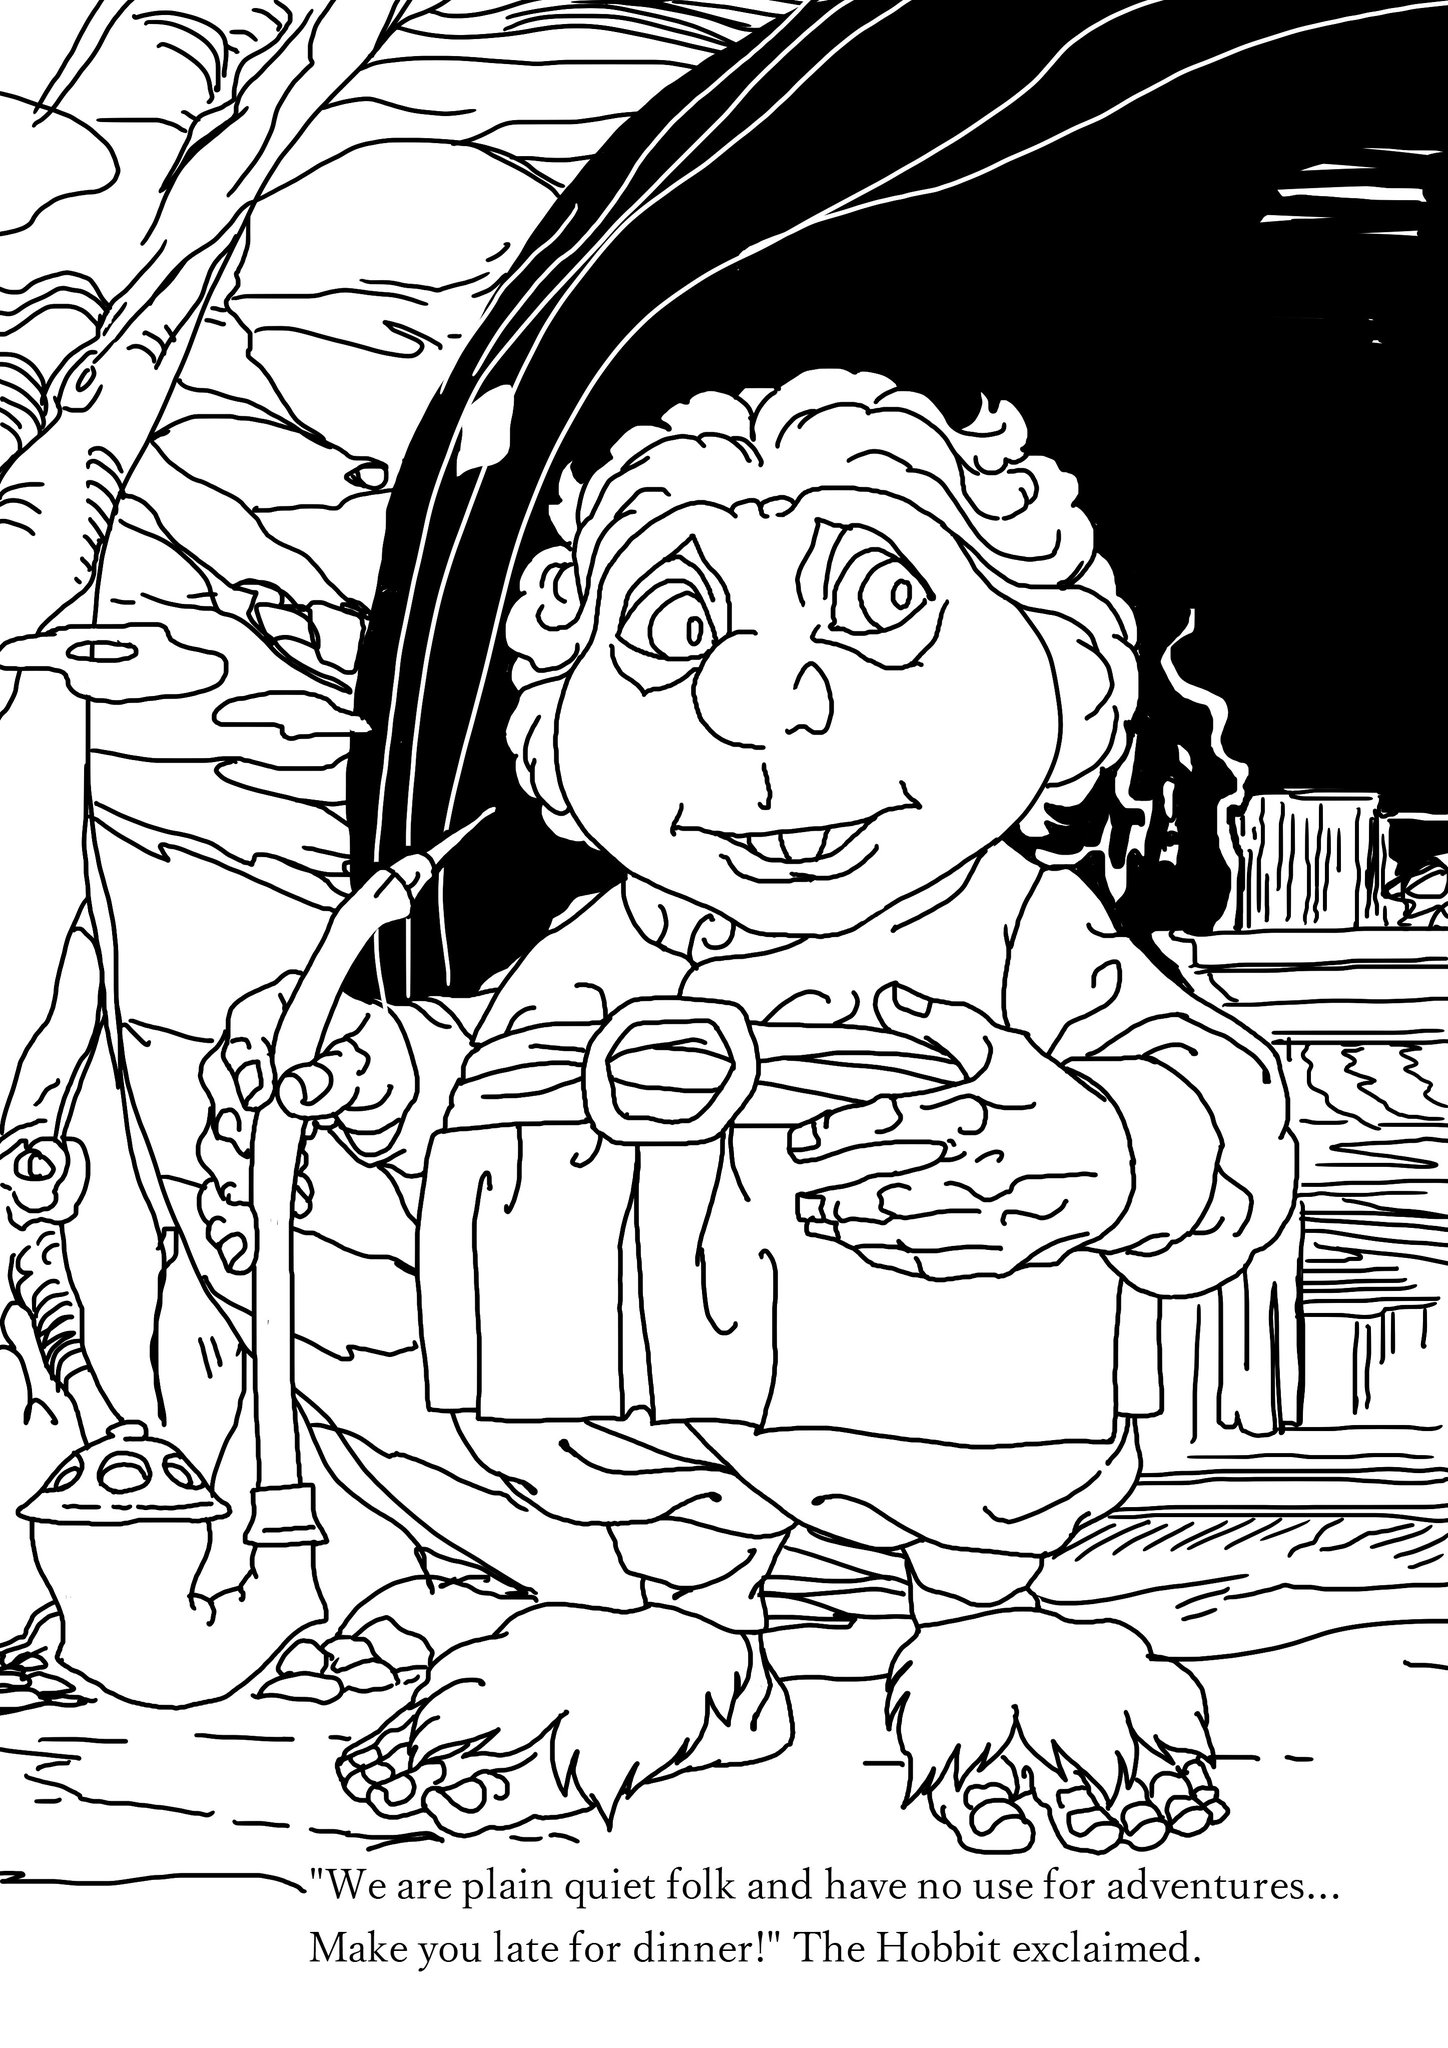 Gerard way on x bandit and i made this hobbit coloring page for the holidays